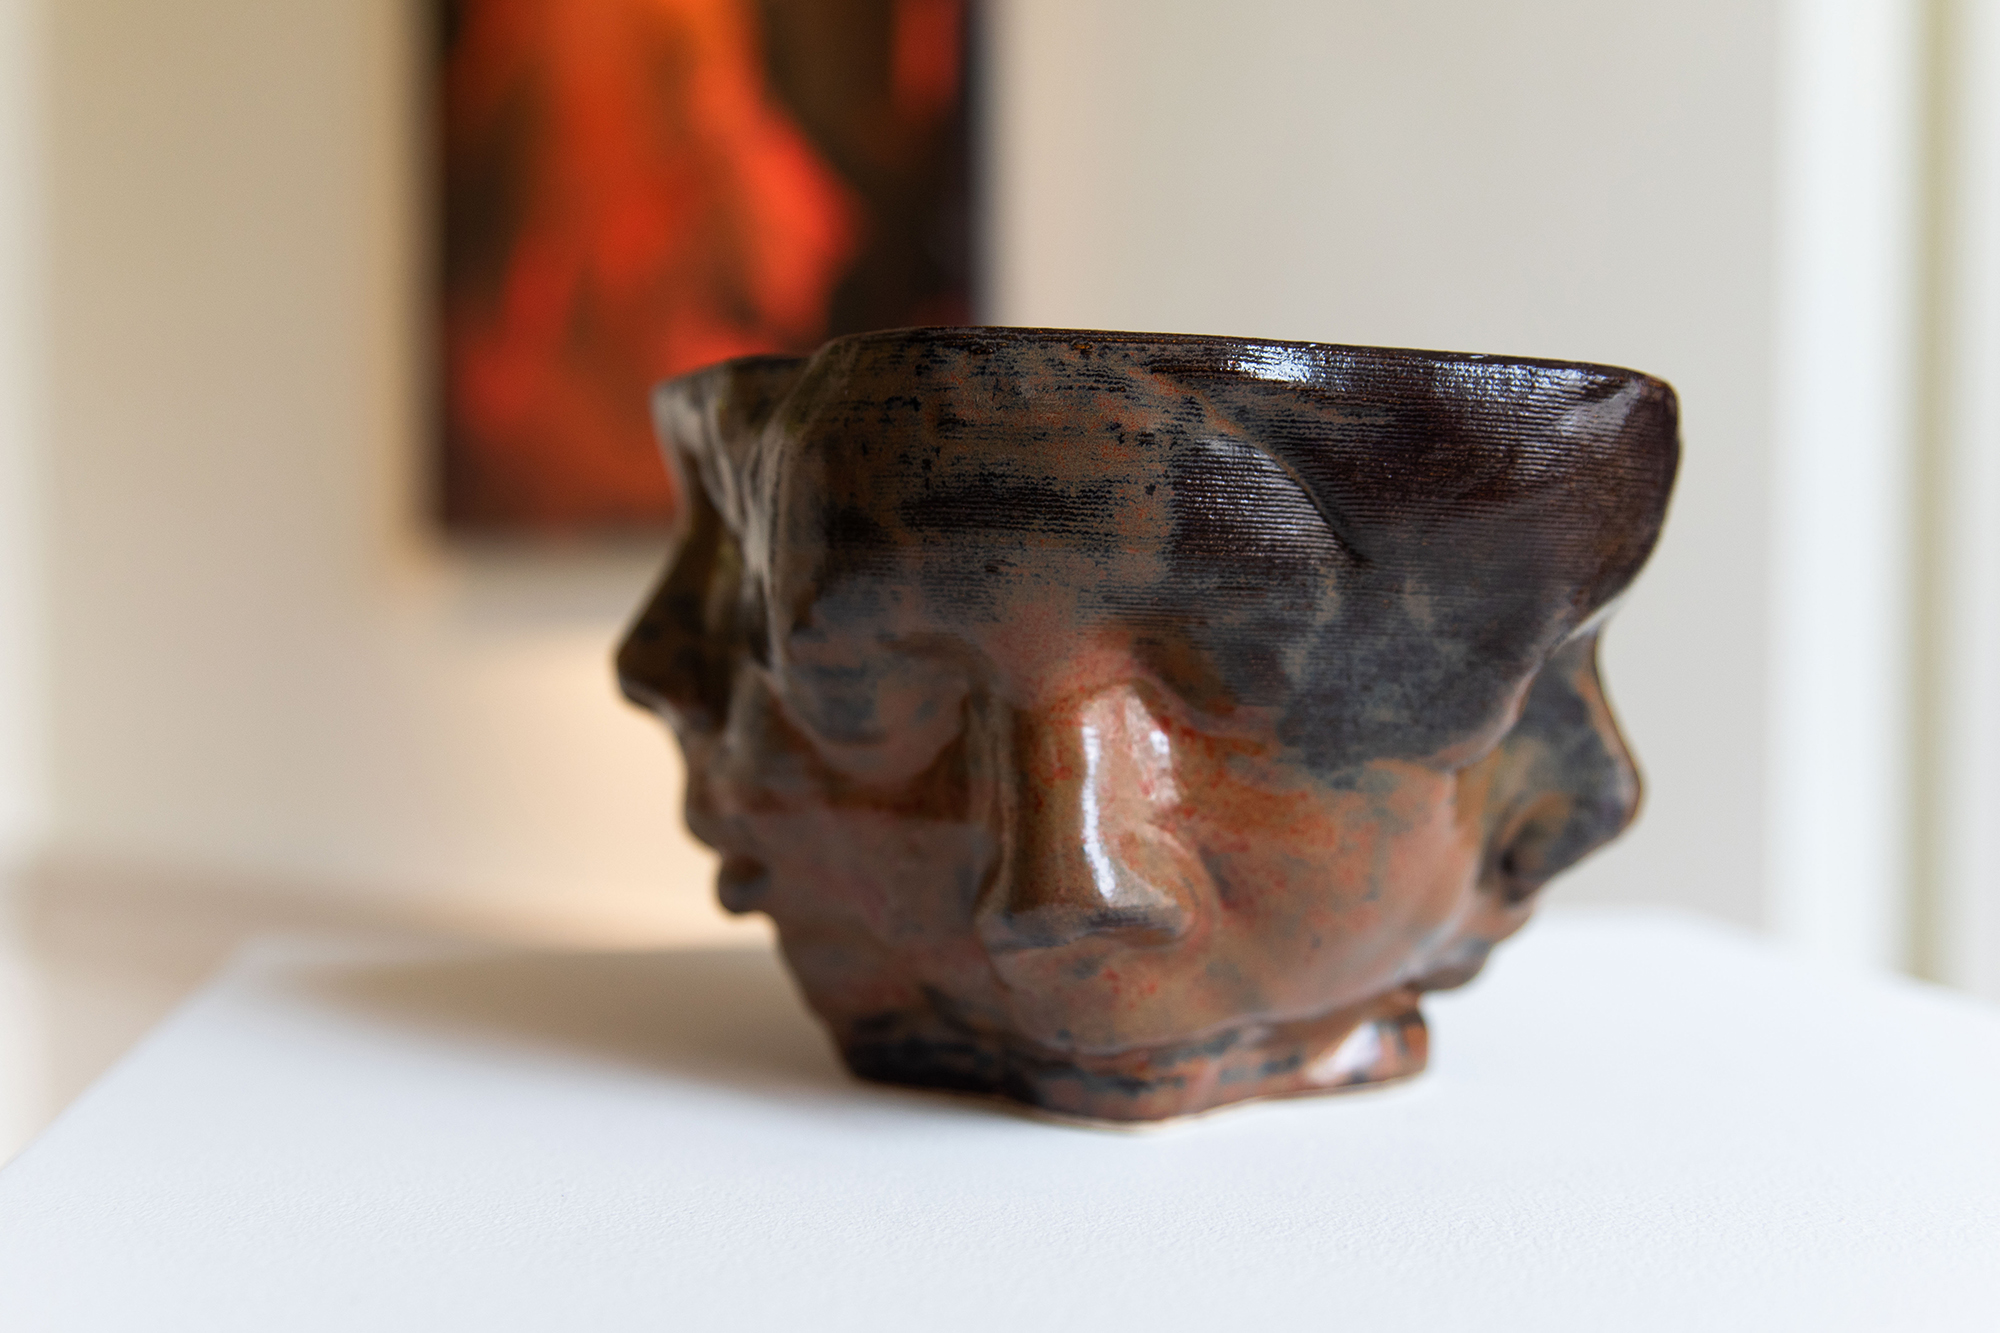 Close-up of brown and red ceramic vessel, on a white plinth. It has faces with closed eyes on it.